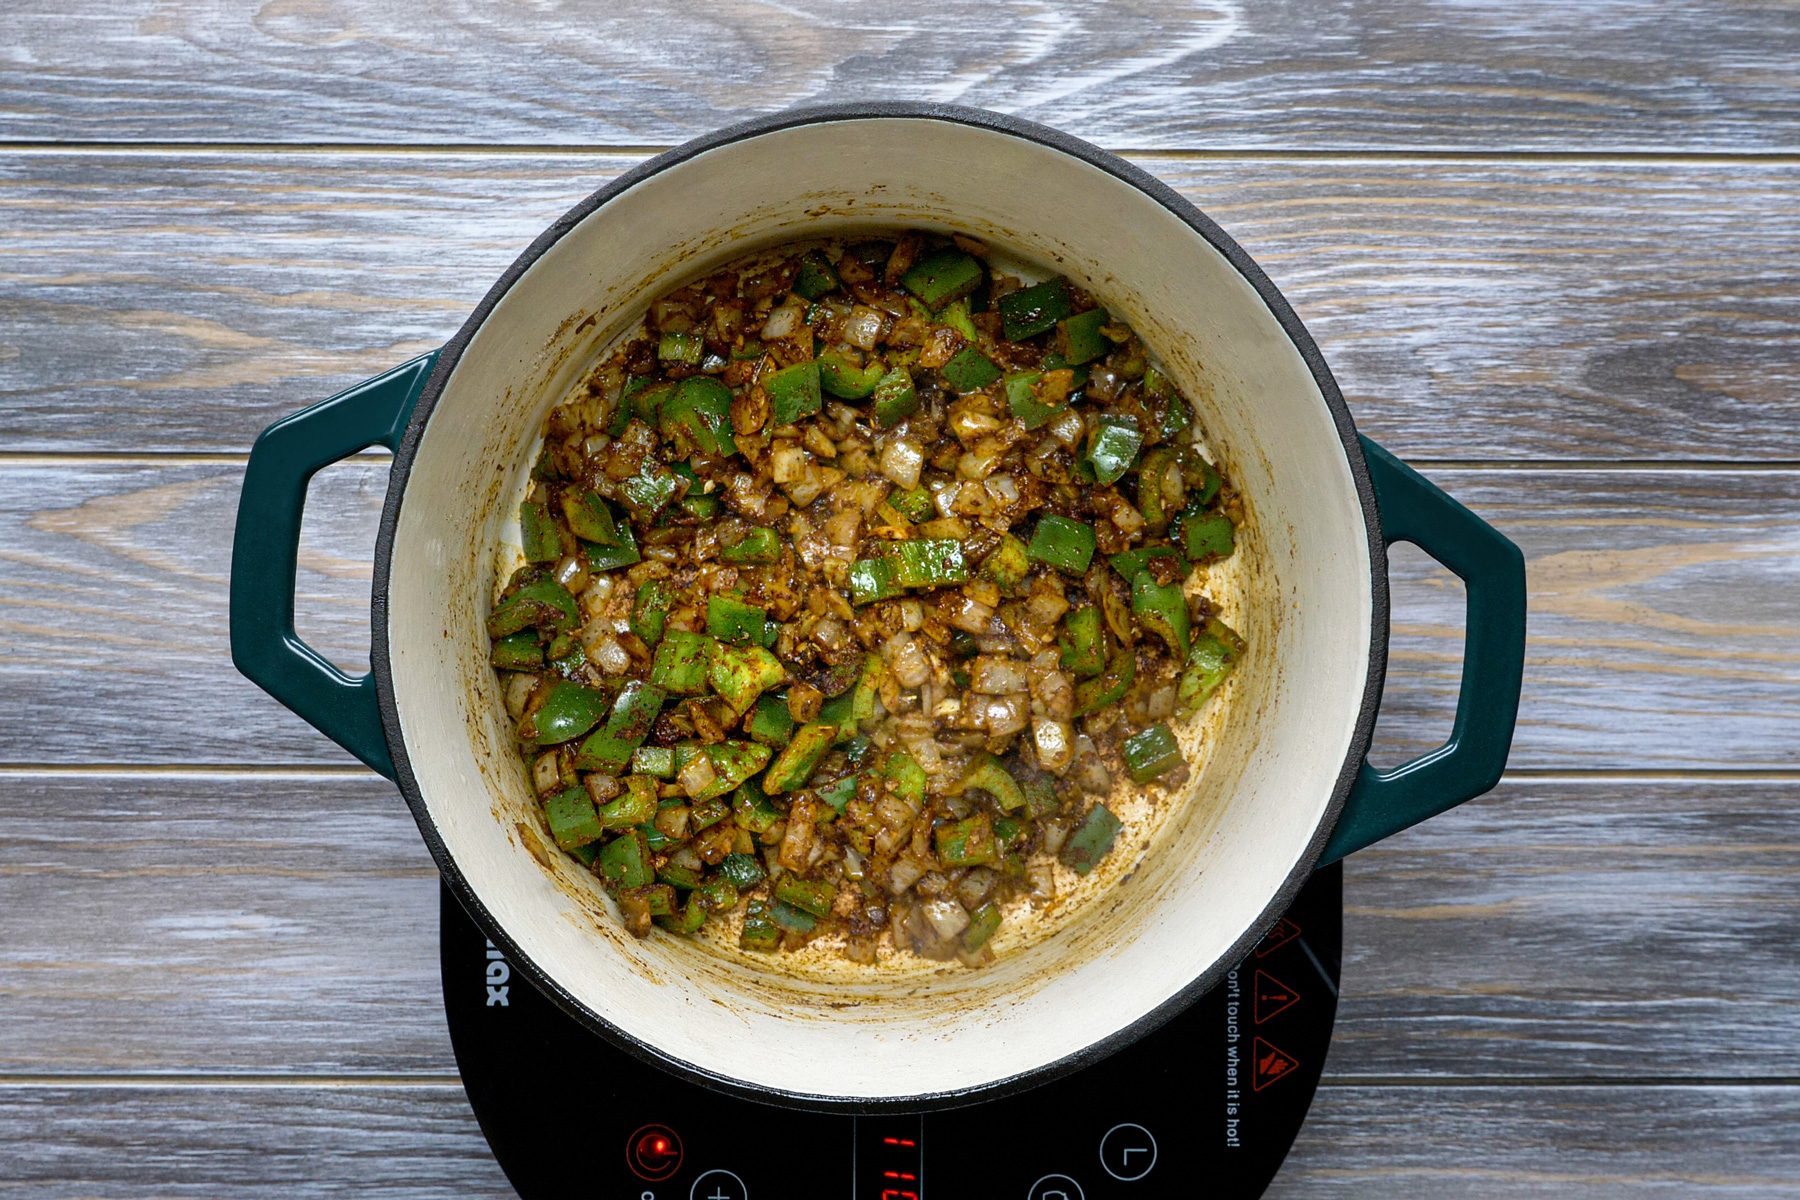 Stirring green peppers, onions, and other ingredients in a Dutch oven